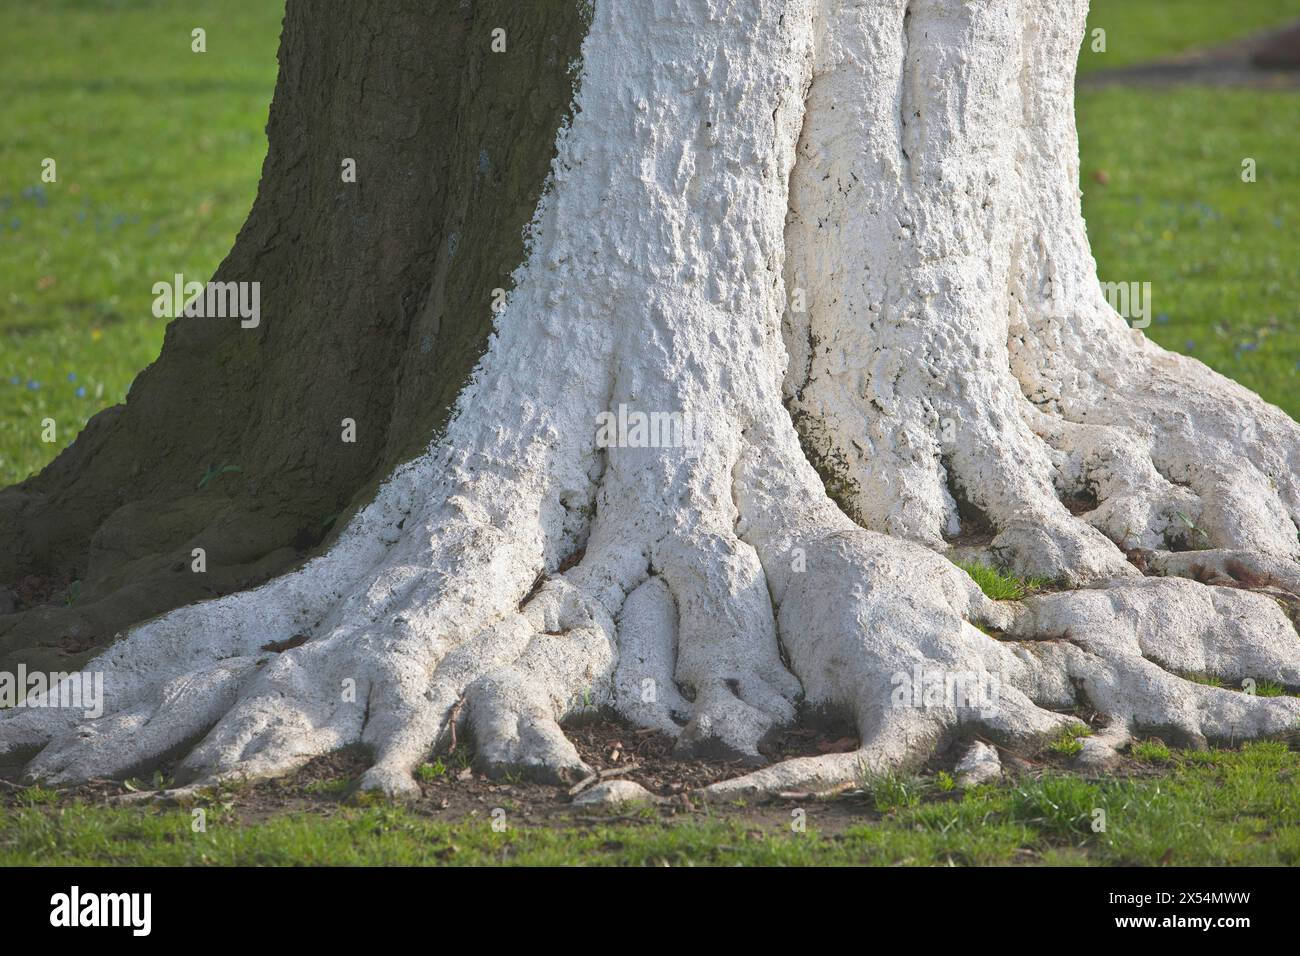 Tree with white color as protection against extreme temperature fluctuations caused by sunlight and frost, Germany, North Rhine-Westphalia Stock Photo